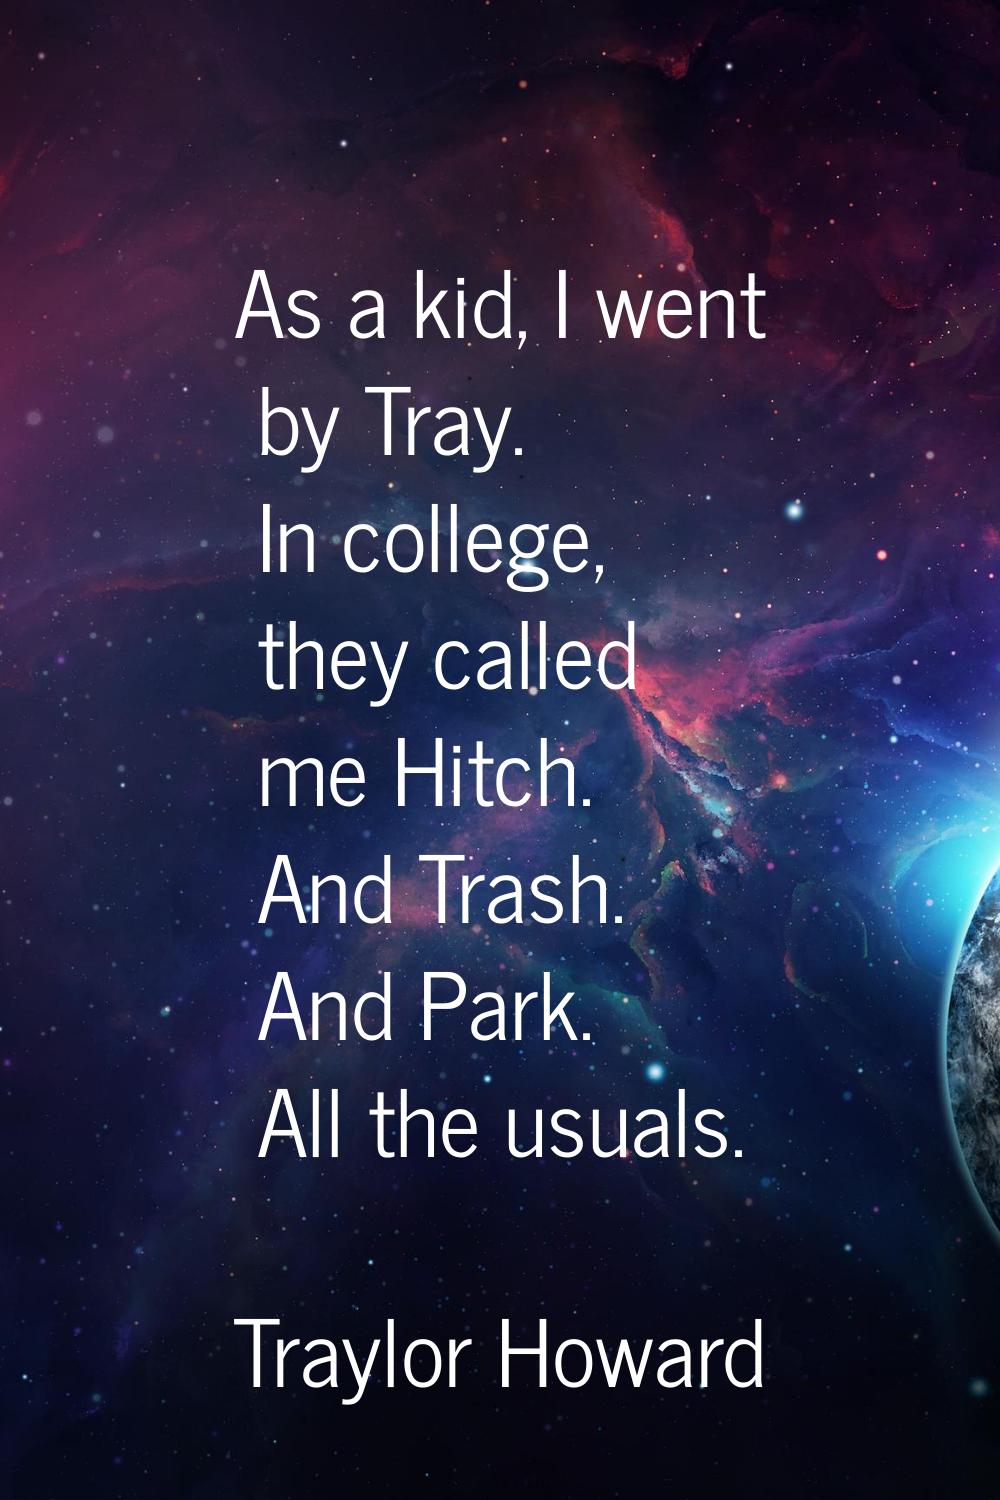 As a kid, I went by Tray. In college, they called me Hitch. And Trash. And Park. All the usuals.